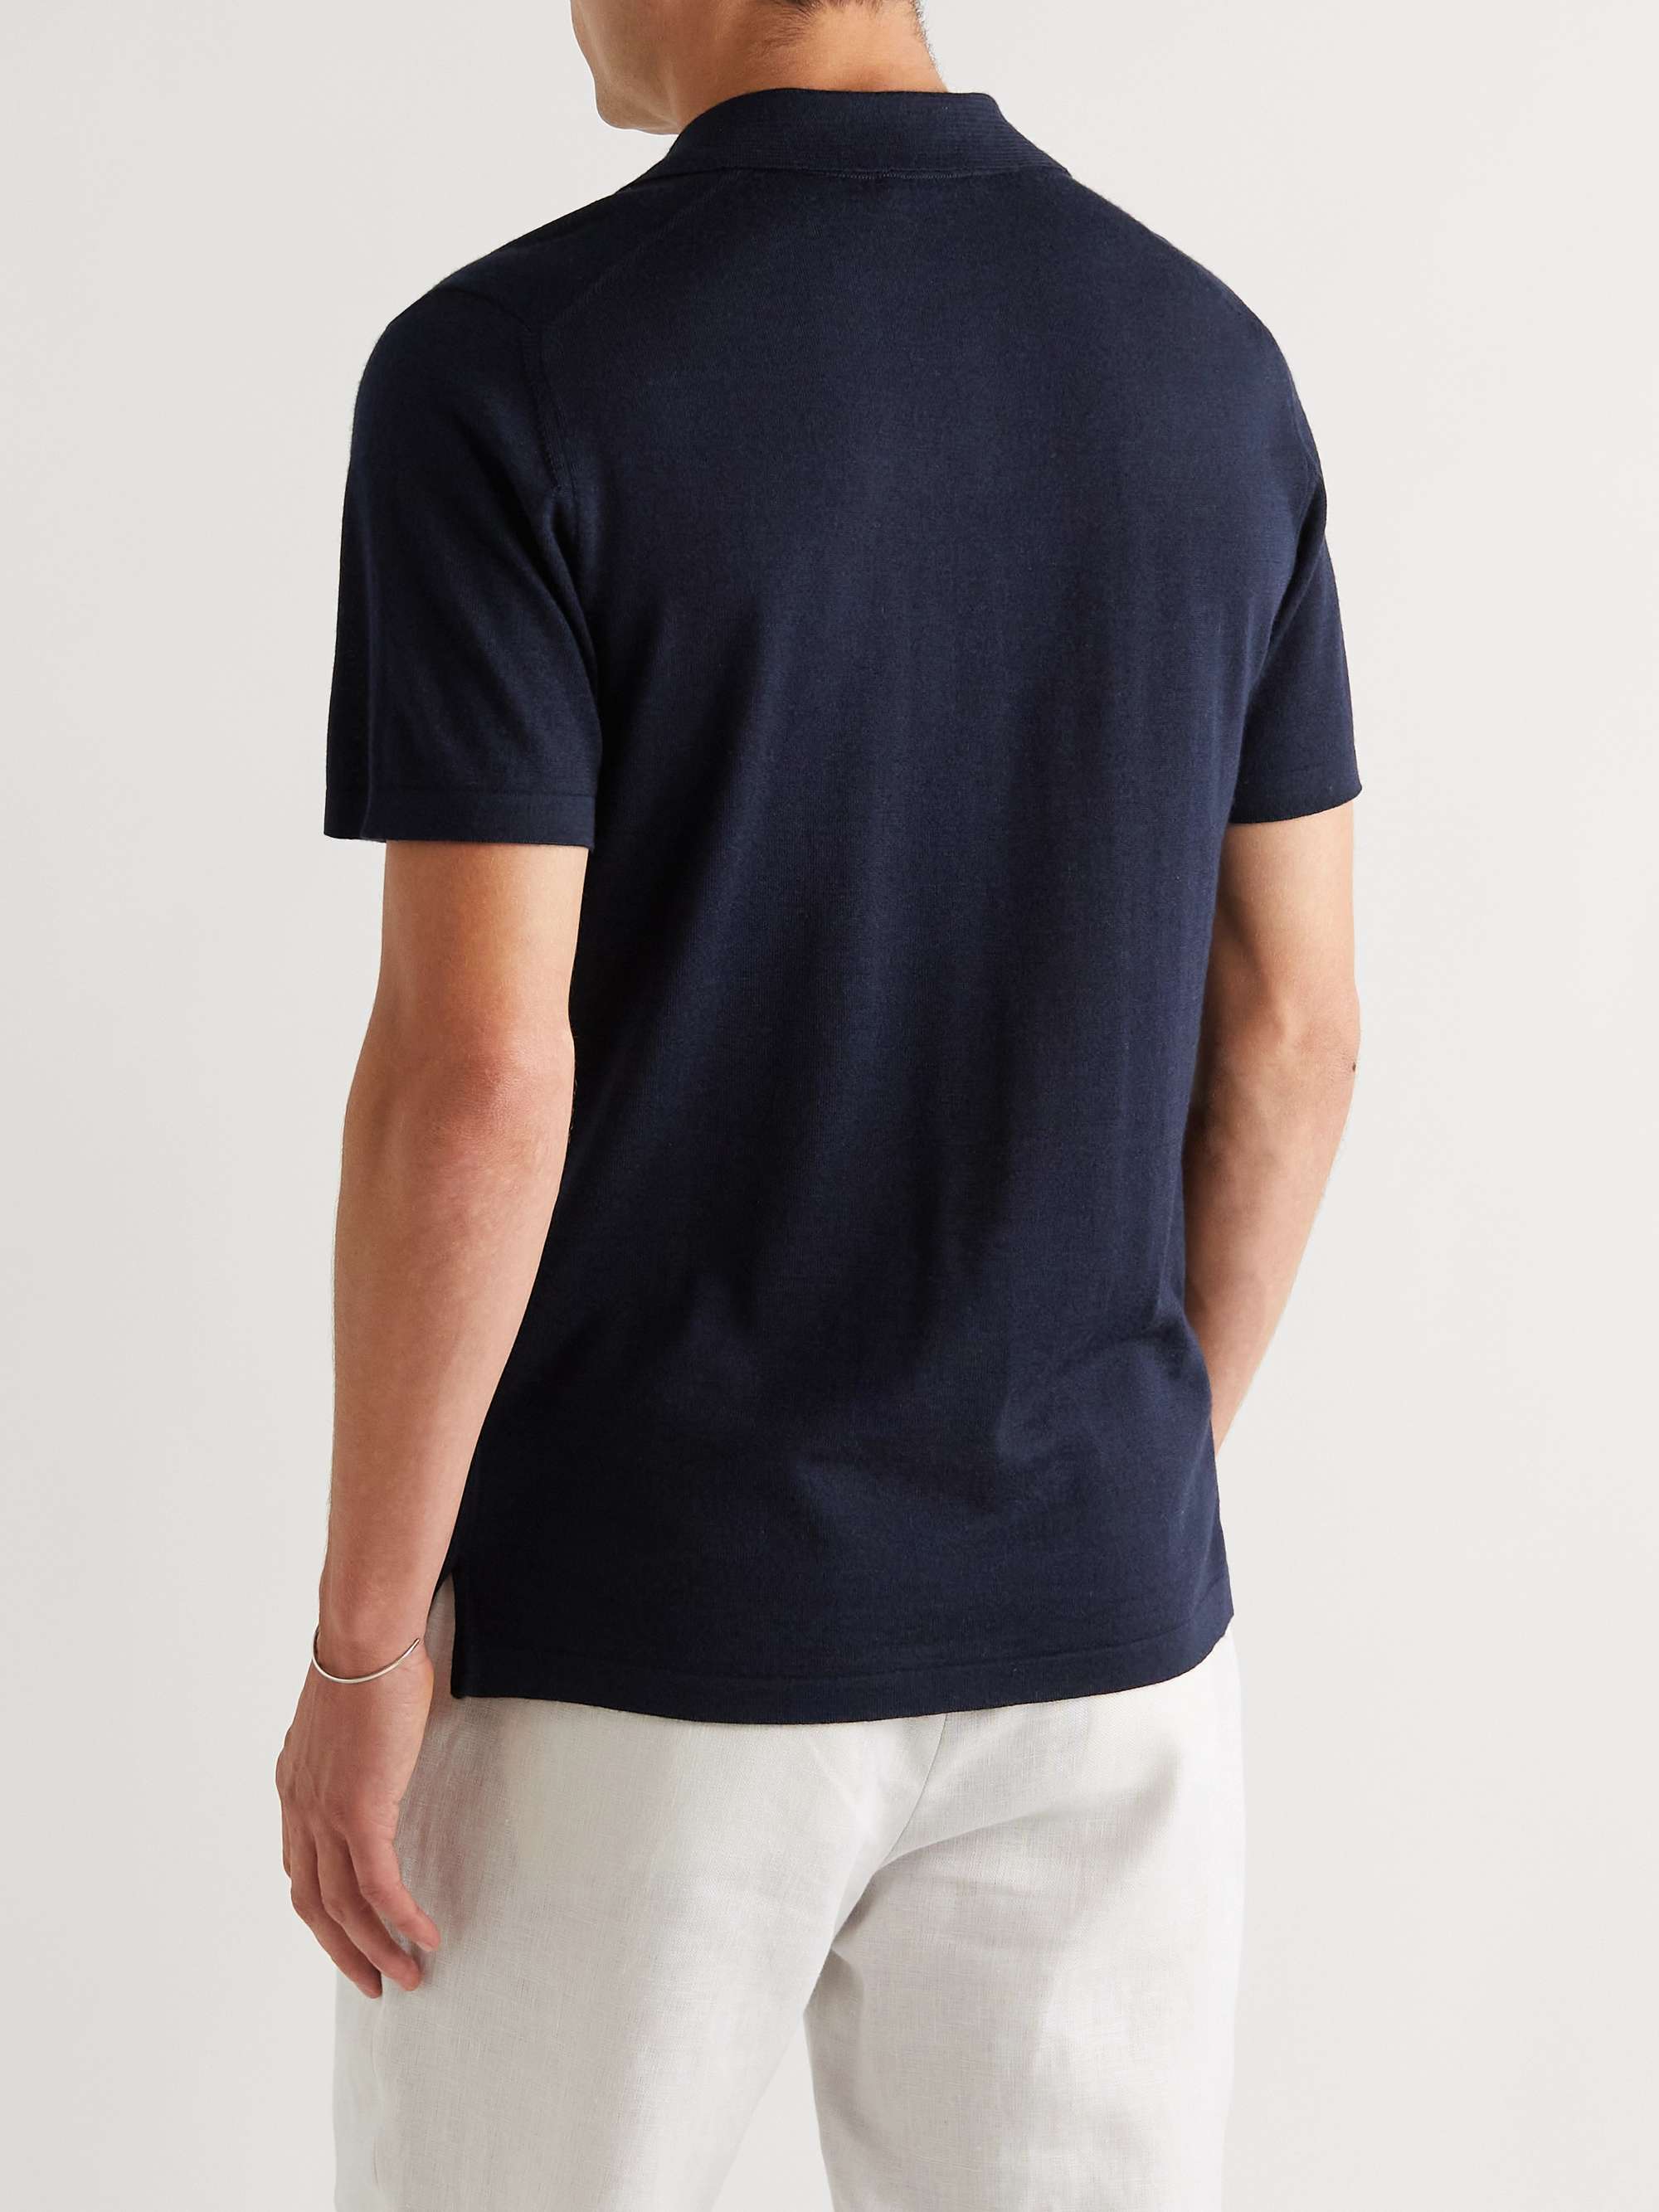 SAMAN AMEL Knitted Cashmere and Silk-Blend Polo Shirt